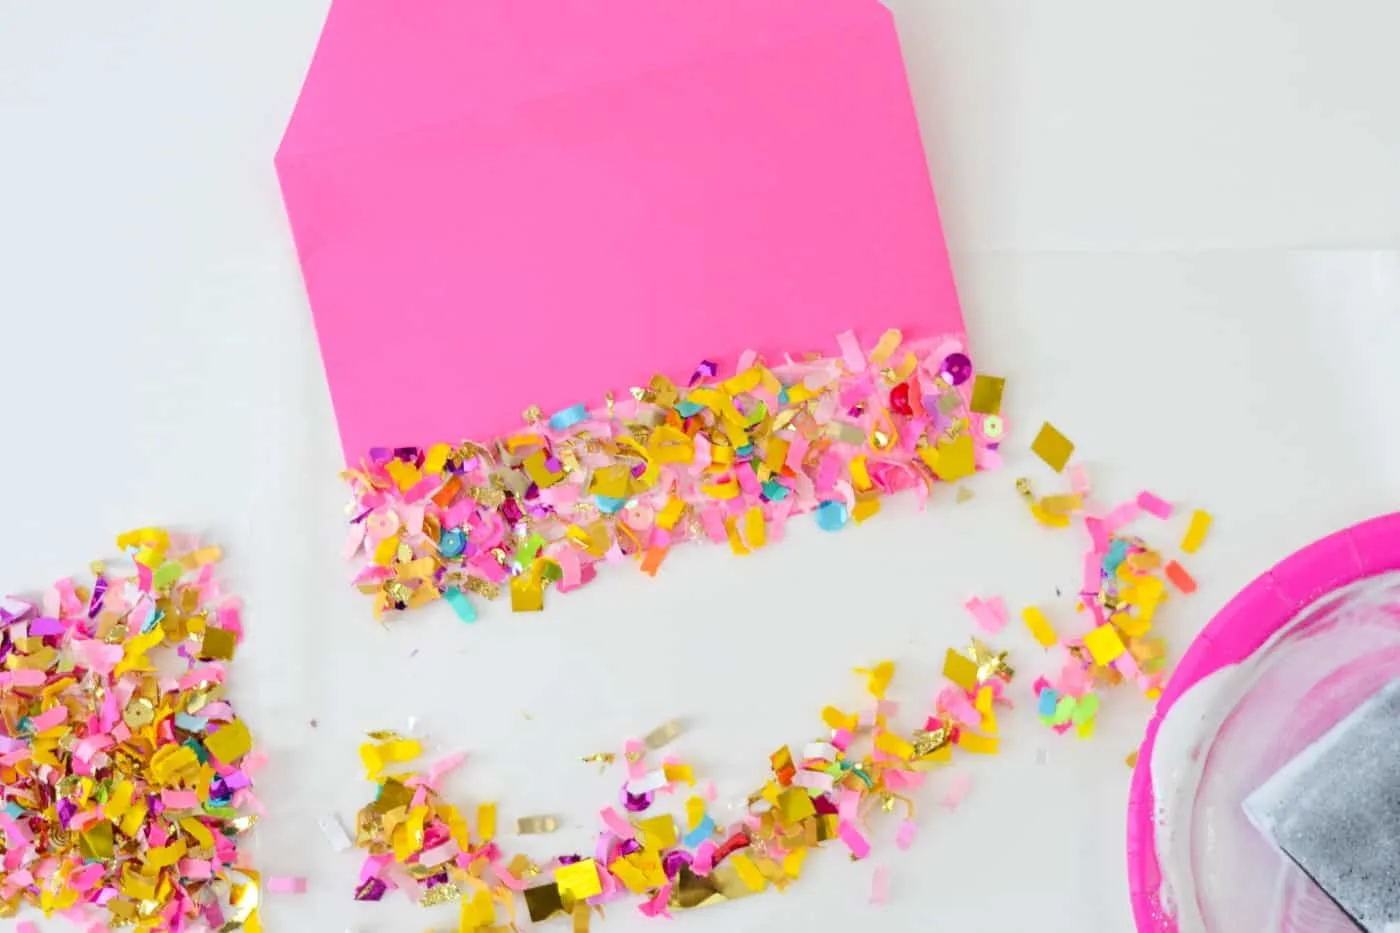 Excess confetti shaken off the envelope